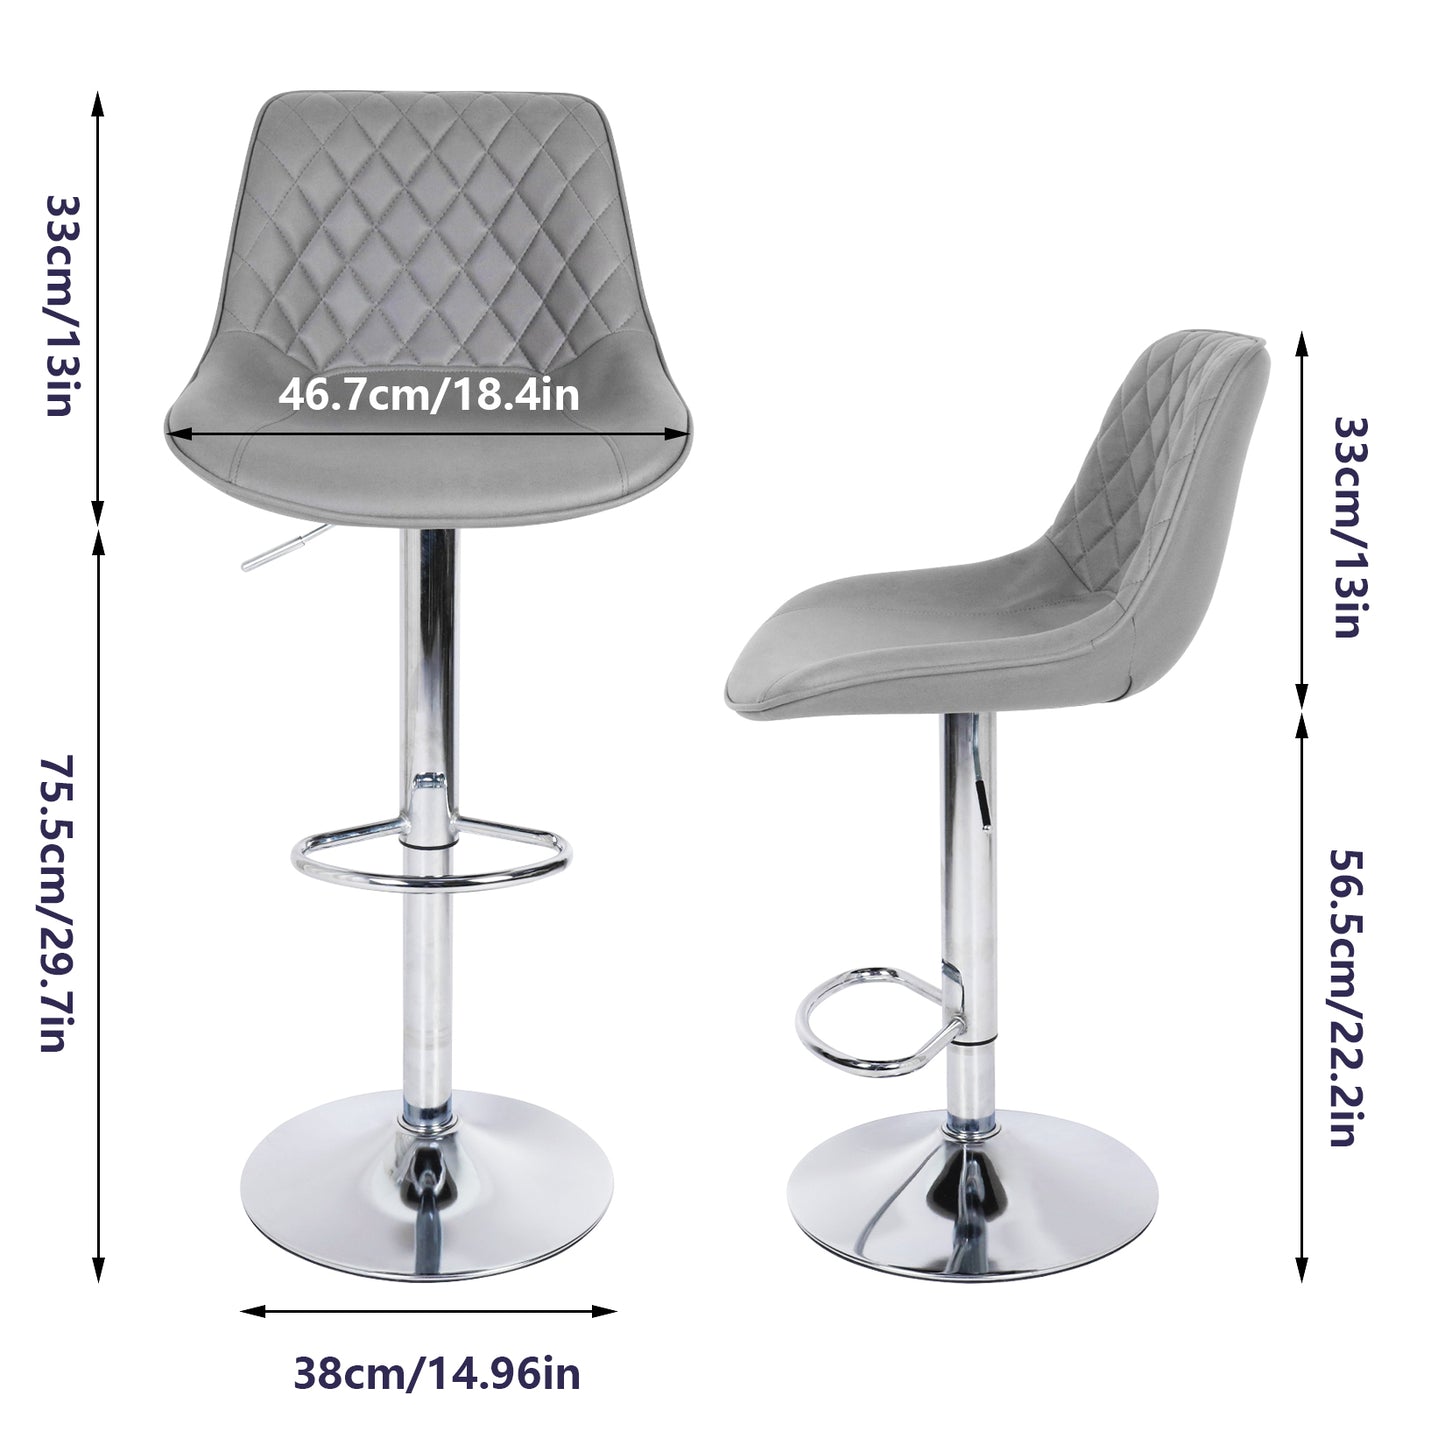 Swivel Upholstered Bar Chair Counter Height Pub Stool